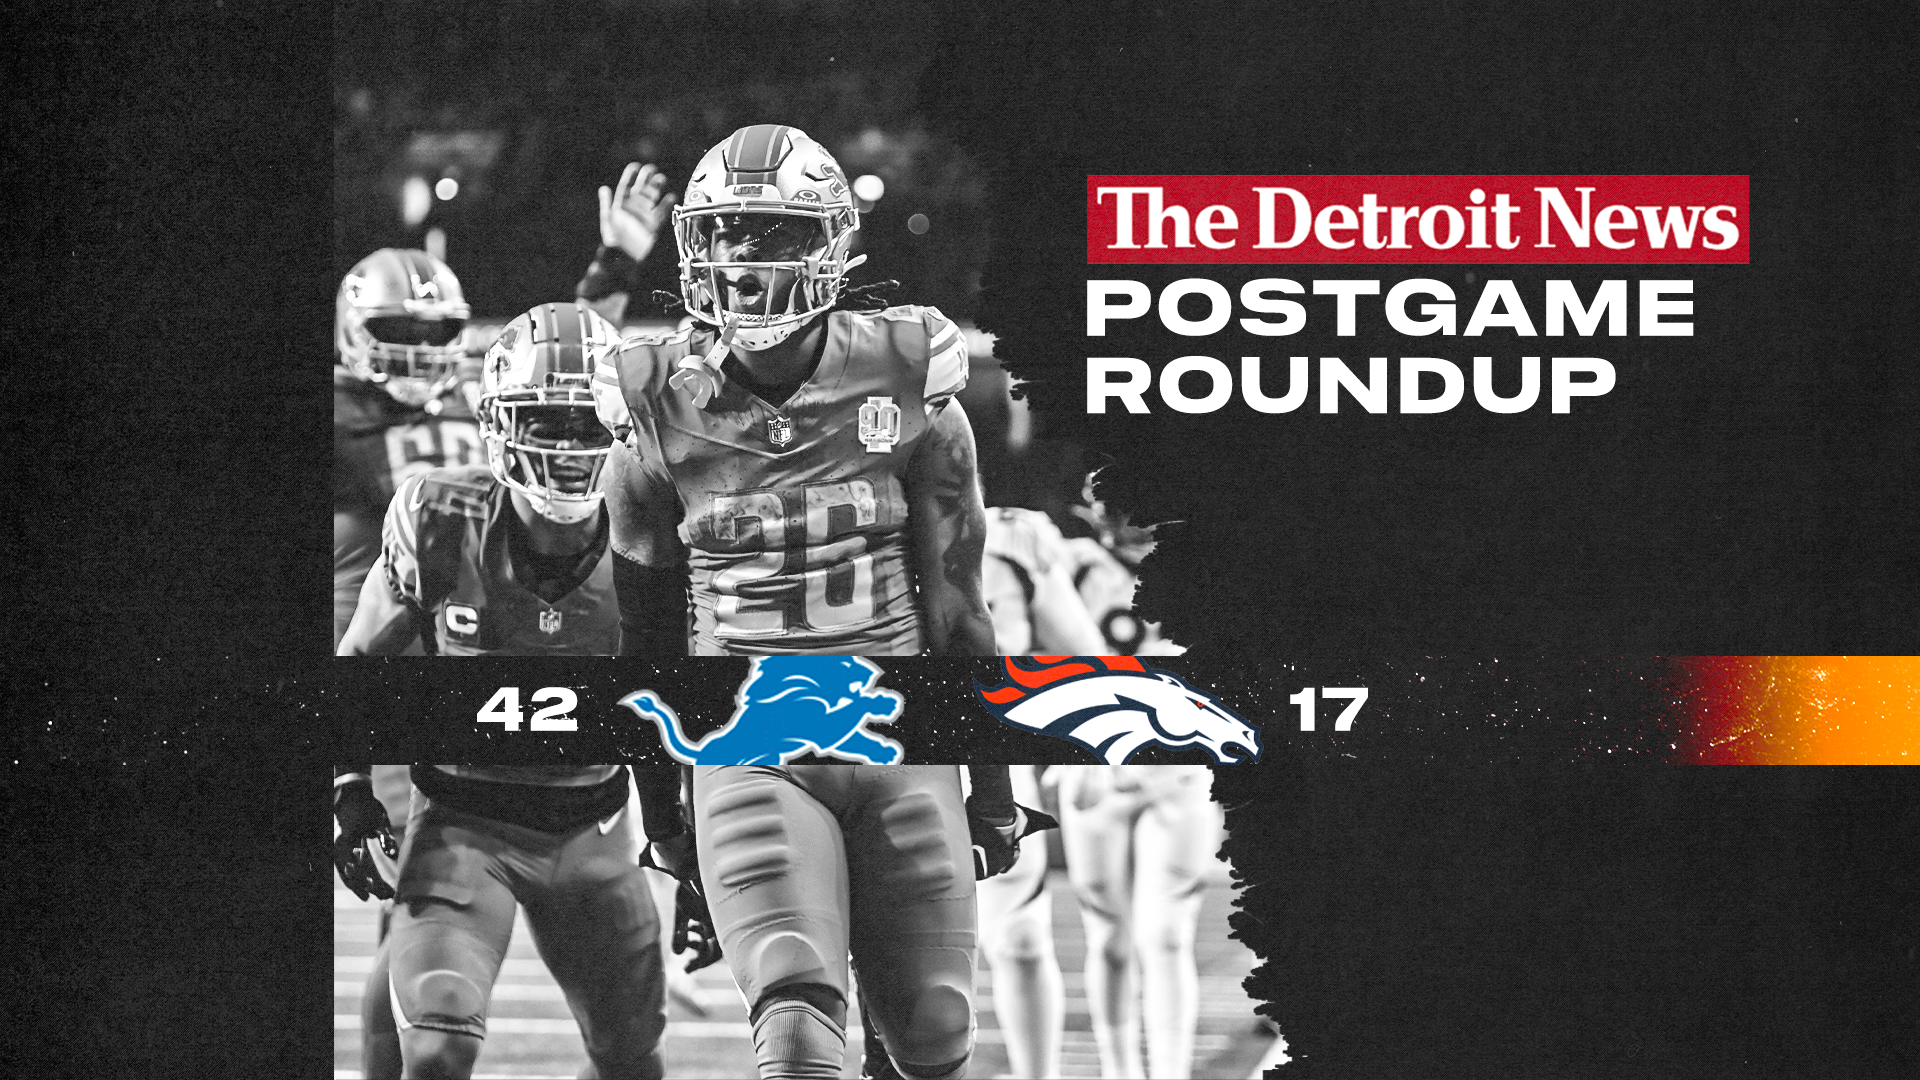 Here's a roundup of all of The Detroit News' coverage from the Detroit Lions' 42-17 win over the Denver Broncos at Ford Field in Detroit.